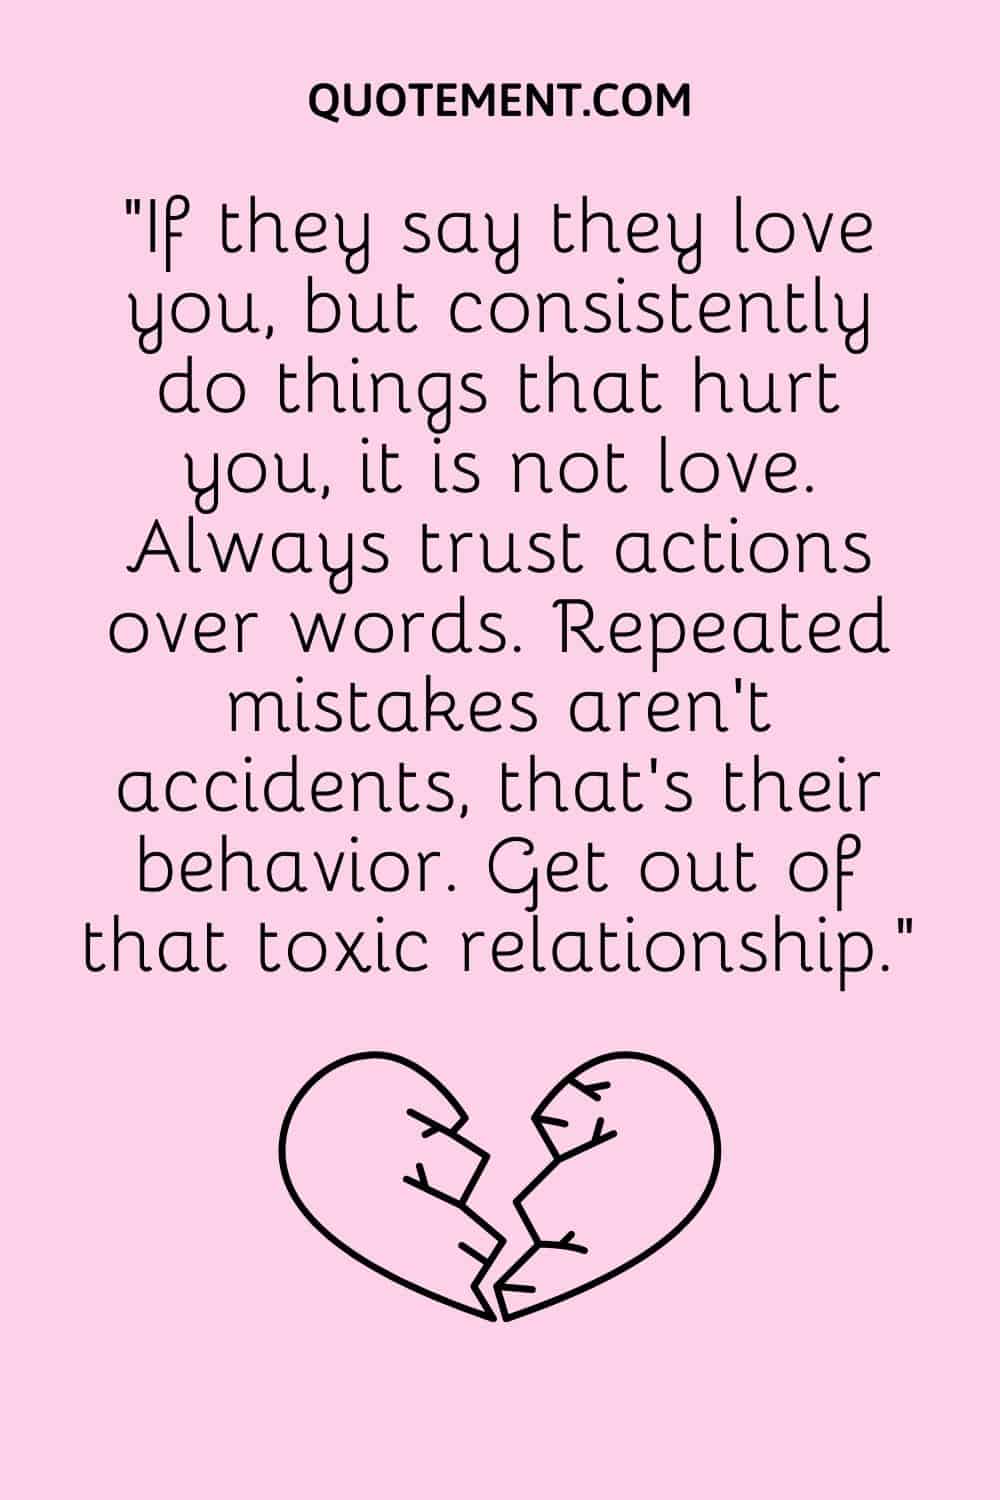 “If they say they love you, but consistently do things that hurt you, it is not love. Always trust actions over words.